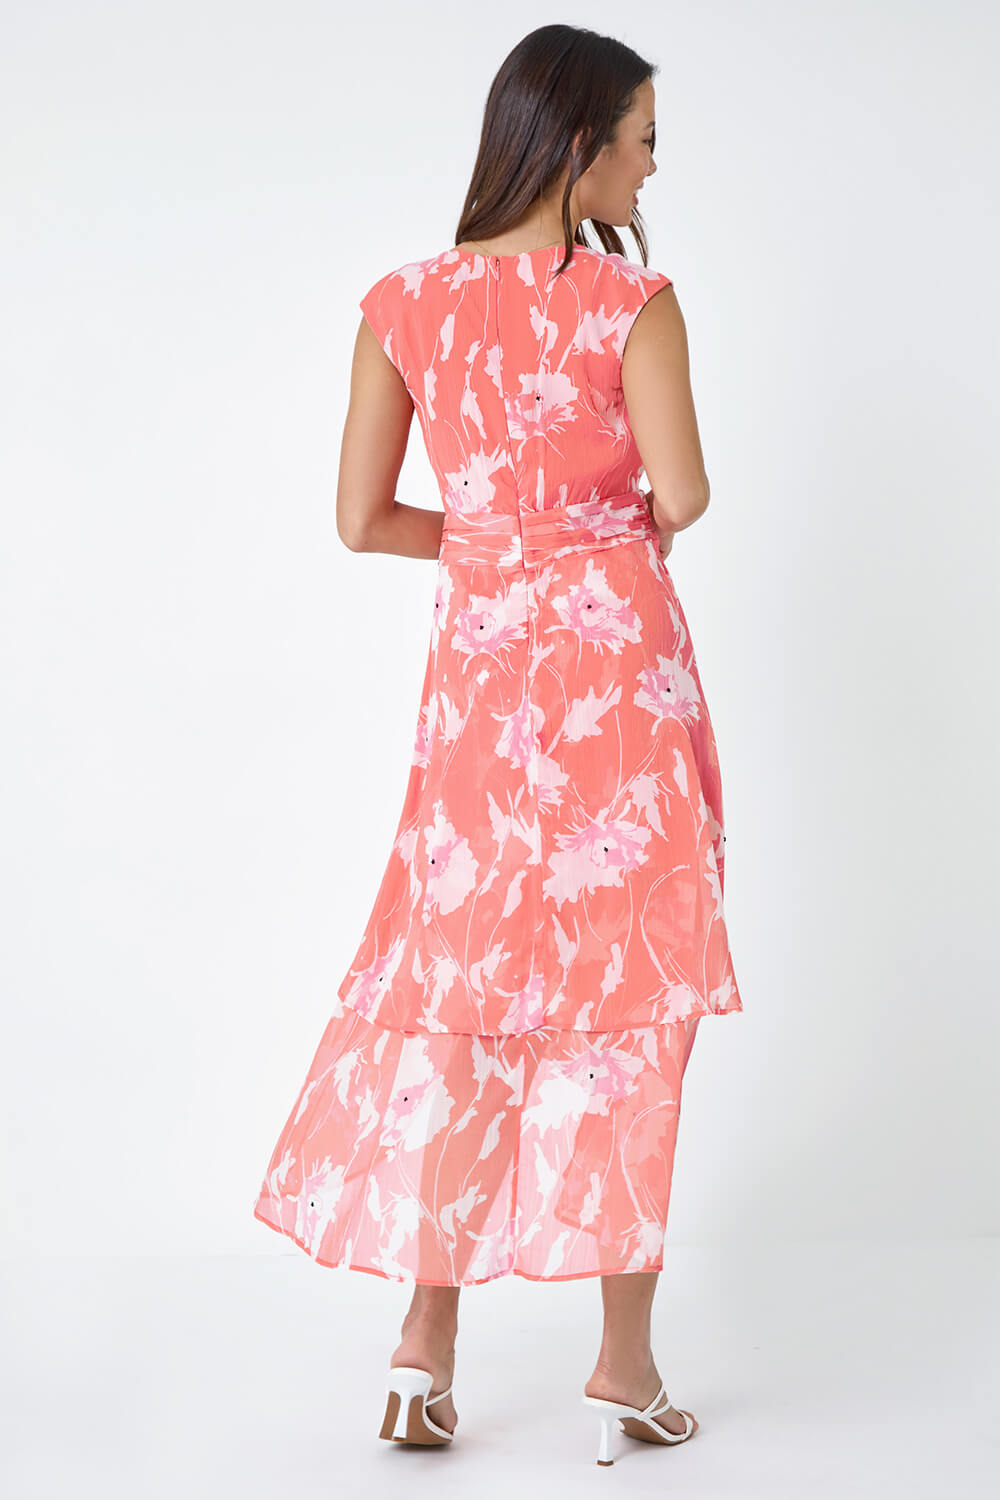 CORAL Embellished Floral Print Tiered Midi Dress, Image 3 of 5